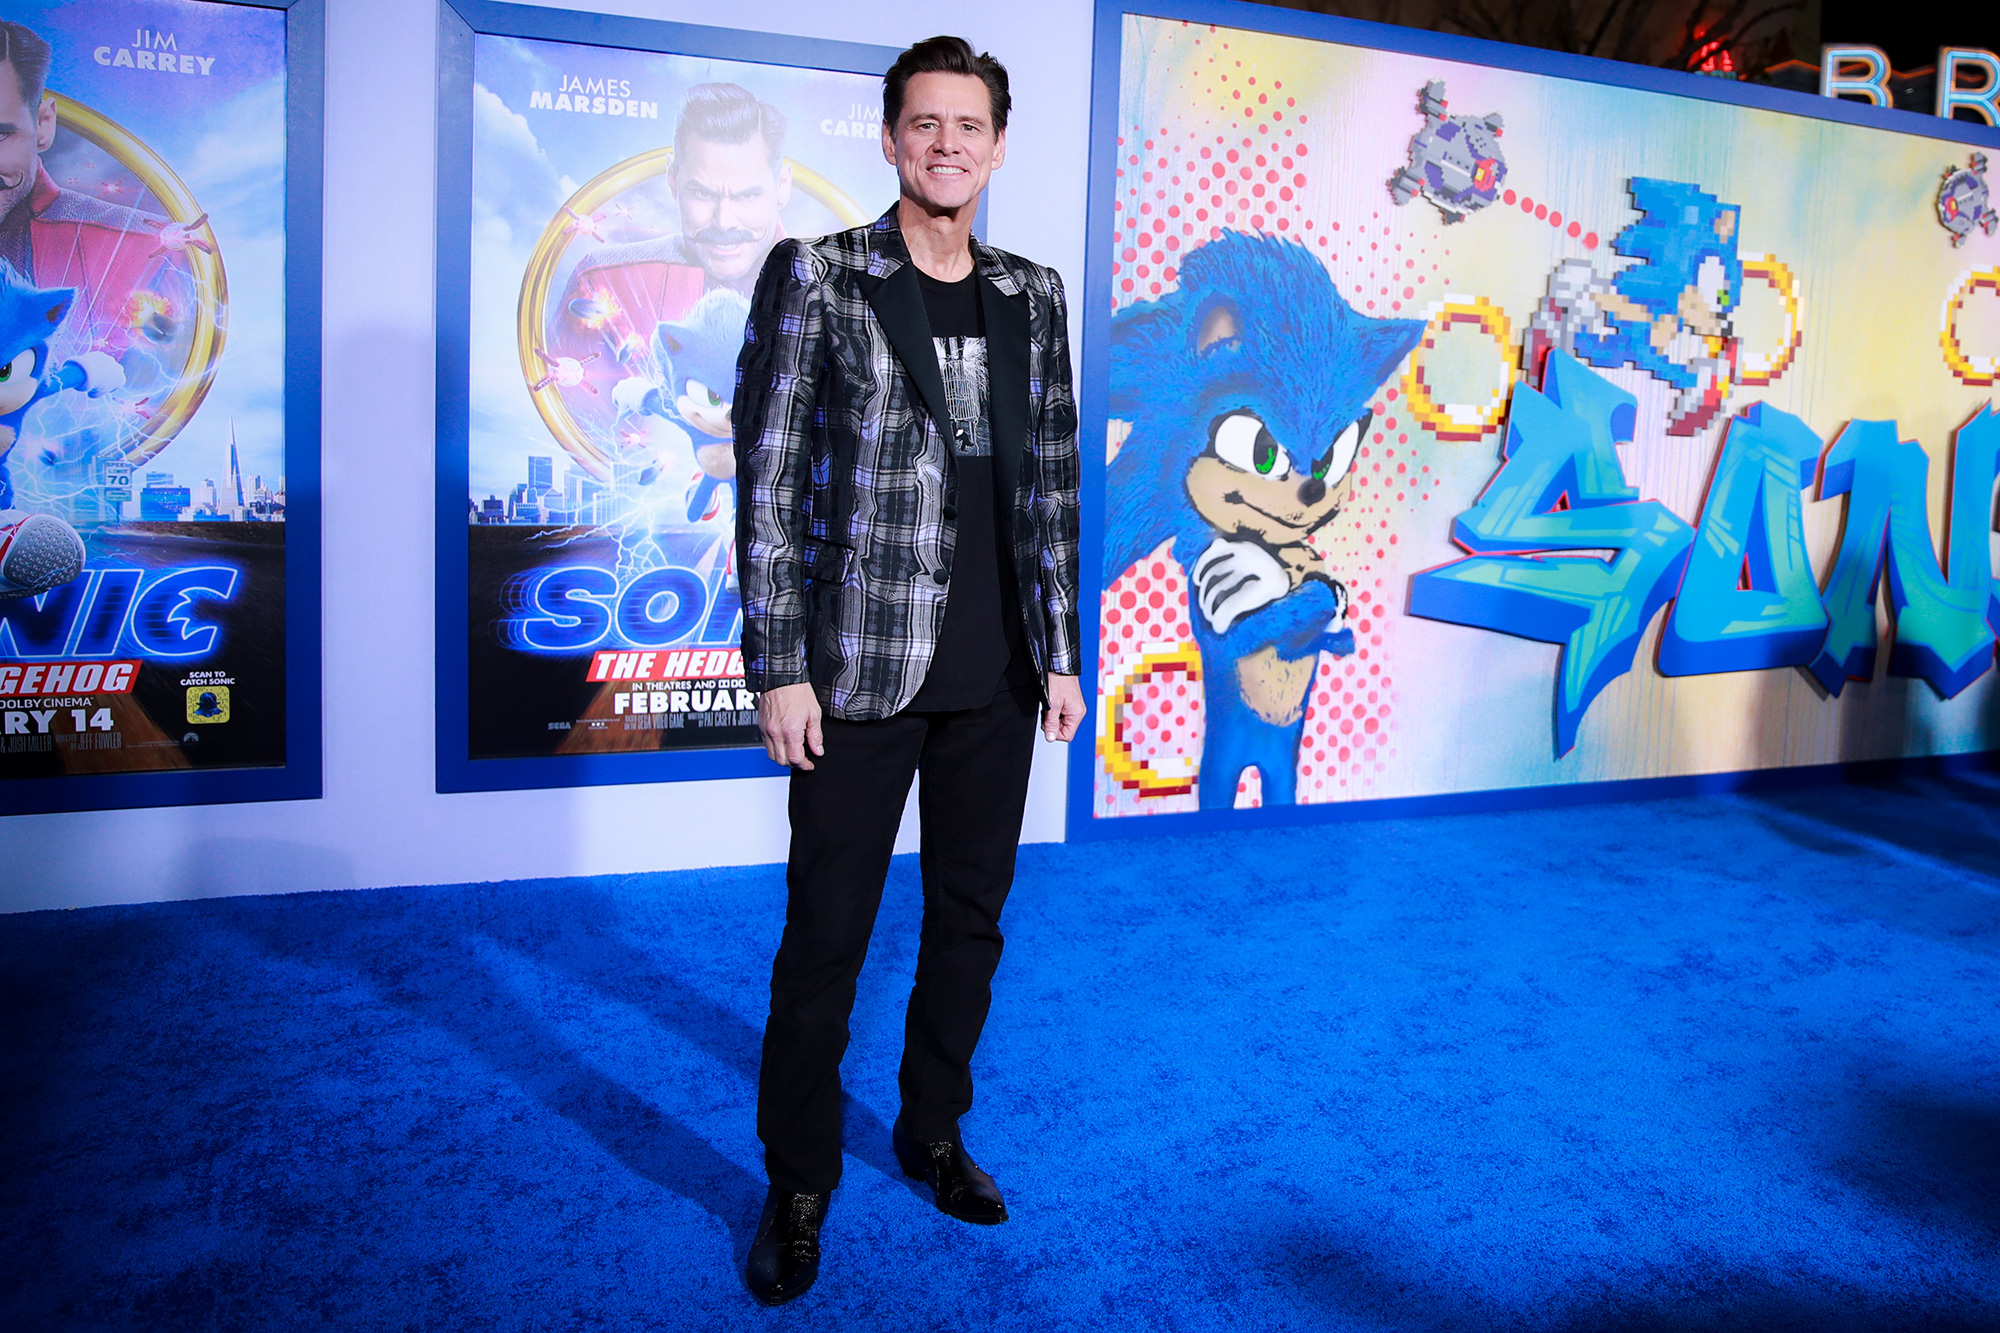 Jim Carrey attends a screening of the film "Sonic The Hedgehog" in Westwood, California, on February 12, 2020.